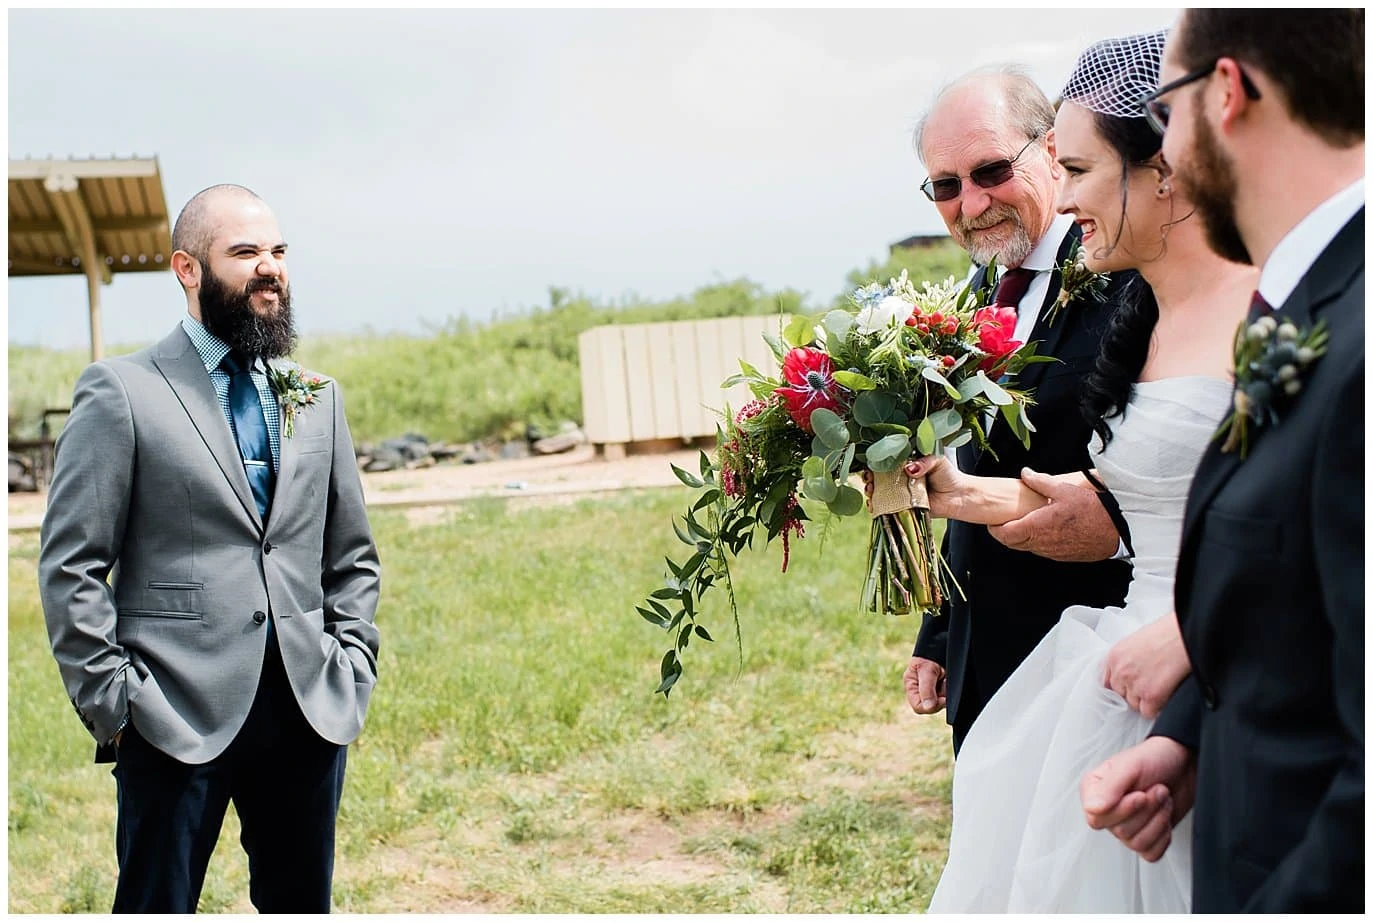 groom seeing bride for first time at wedding photo